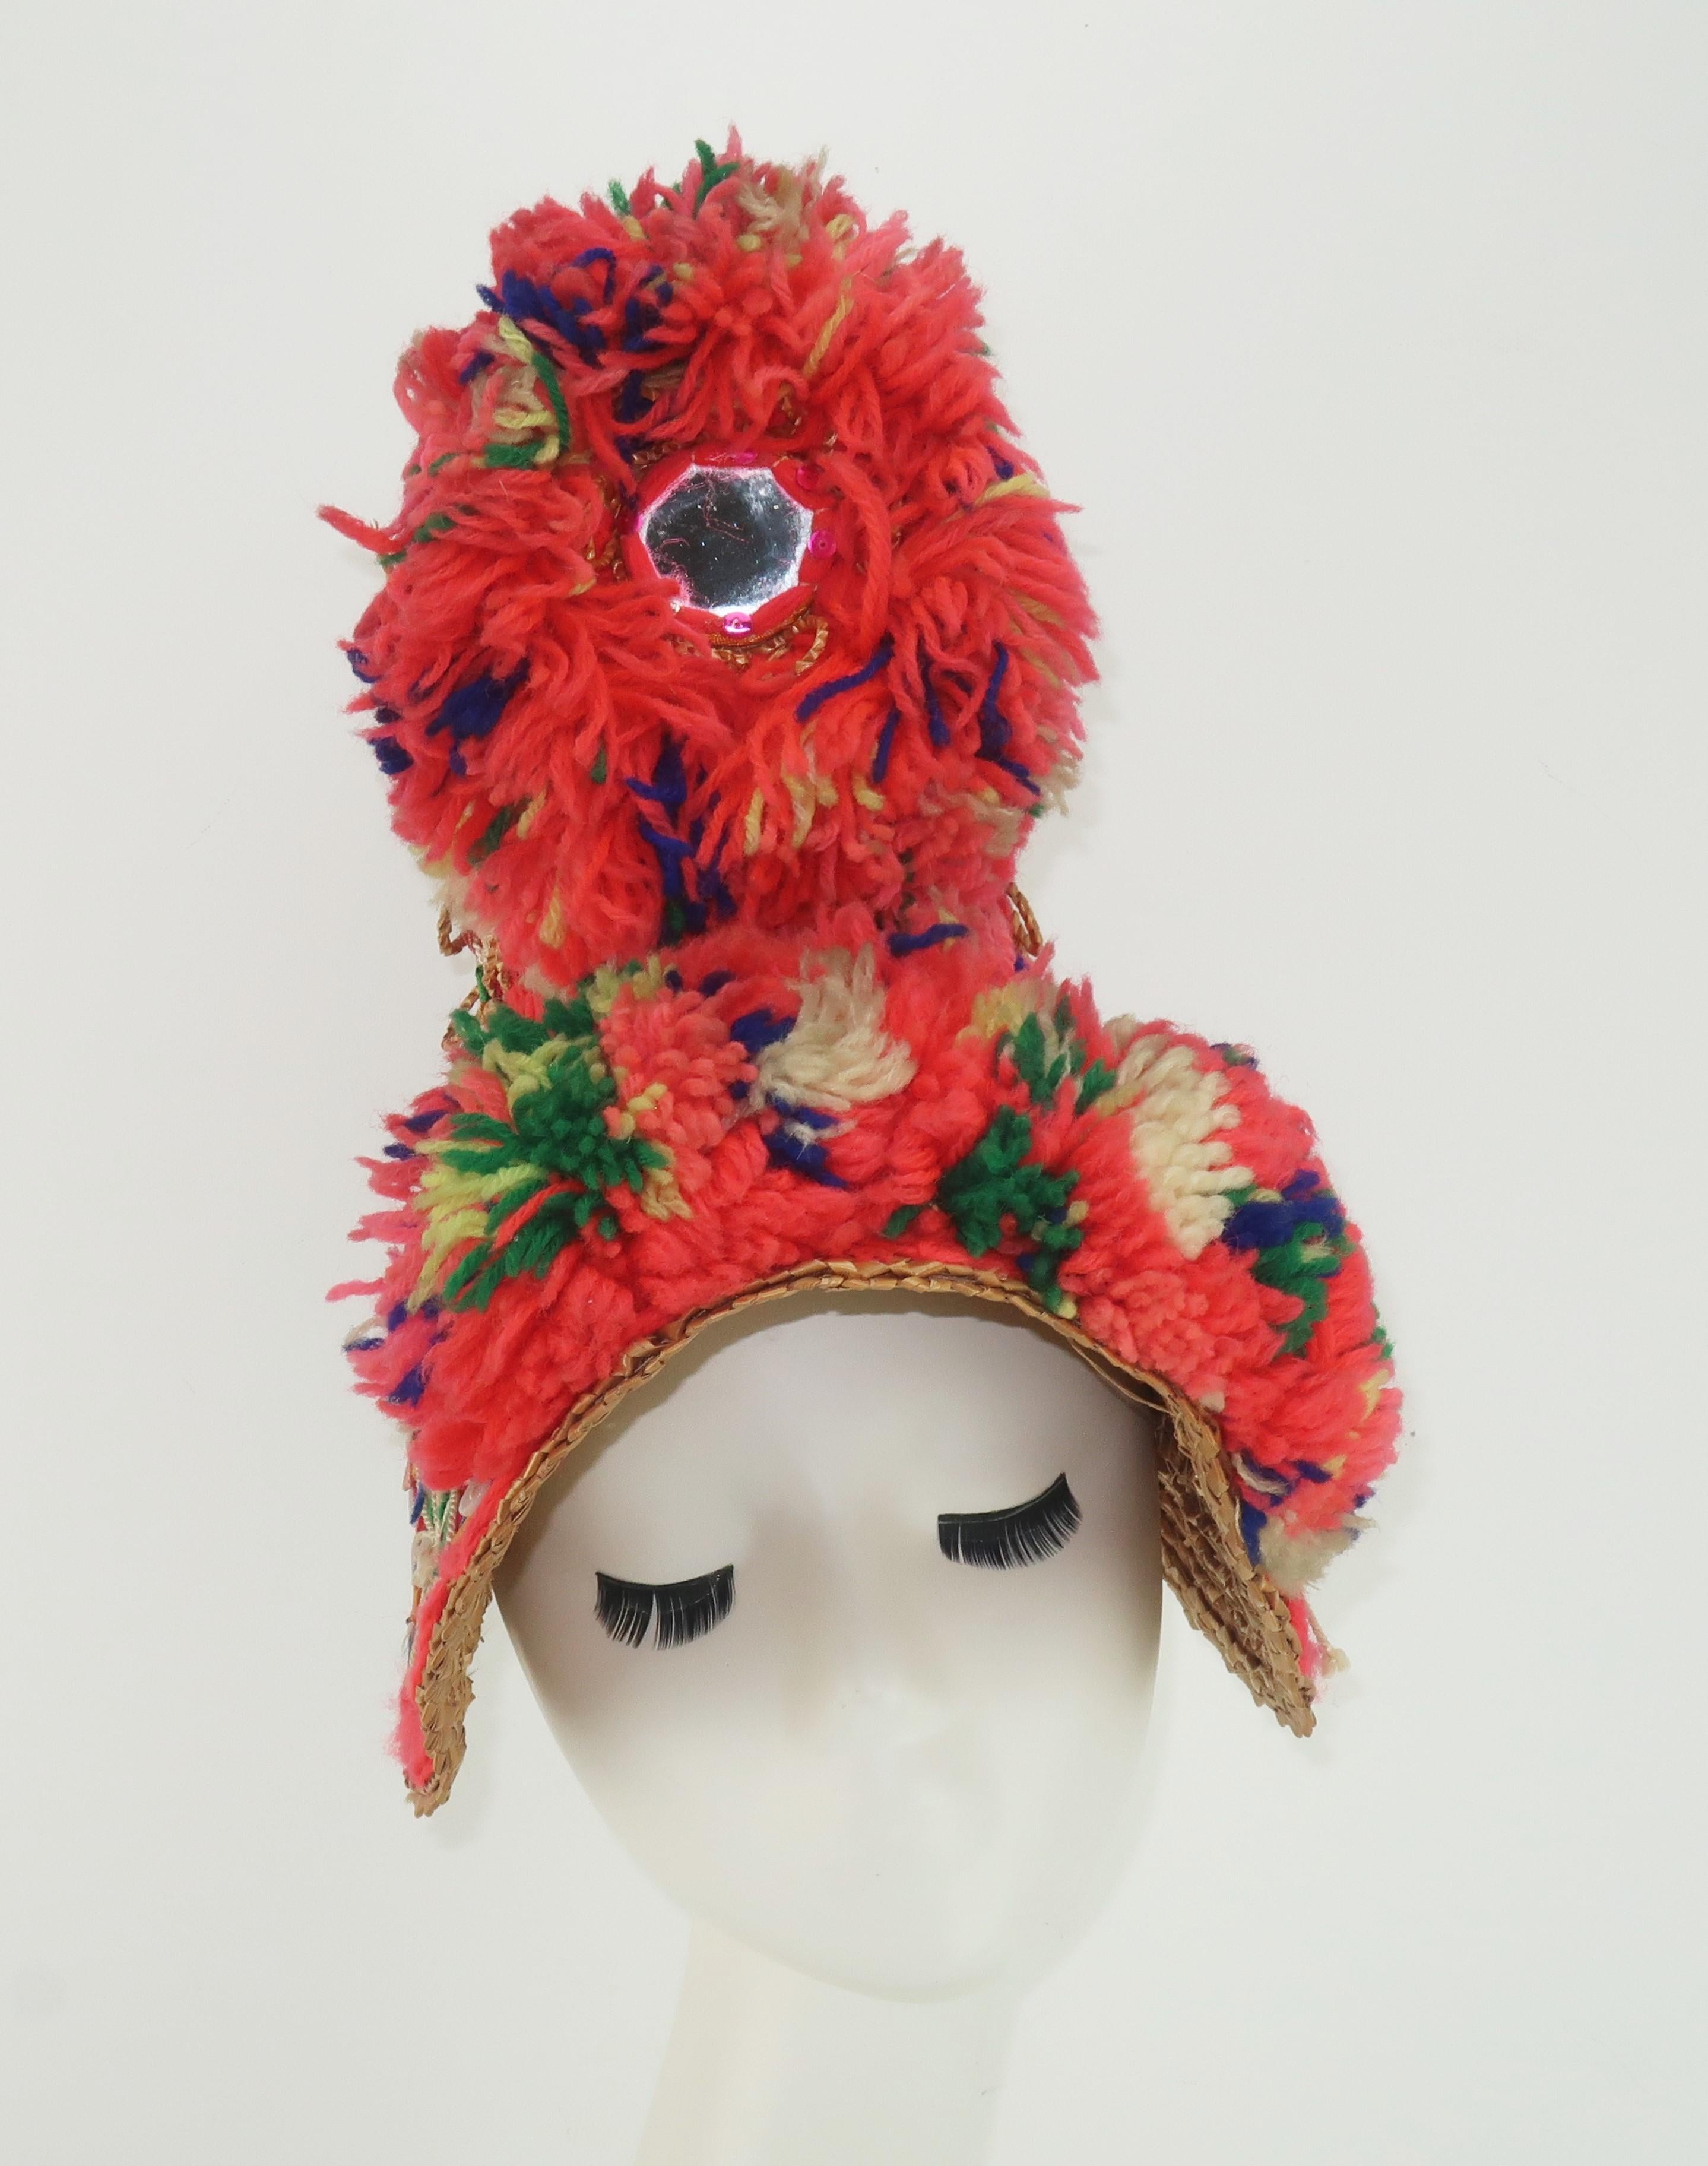 An amazing heavily embellished Spanish 1950's straw hat with an exaggerated silhouette that is reminiscent of Victorian poke bonnets.  The hat sports a tall crown with a curved brim that frames the face and is decorated with brightly colored yarn,